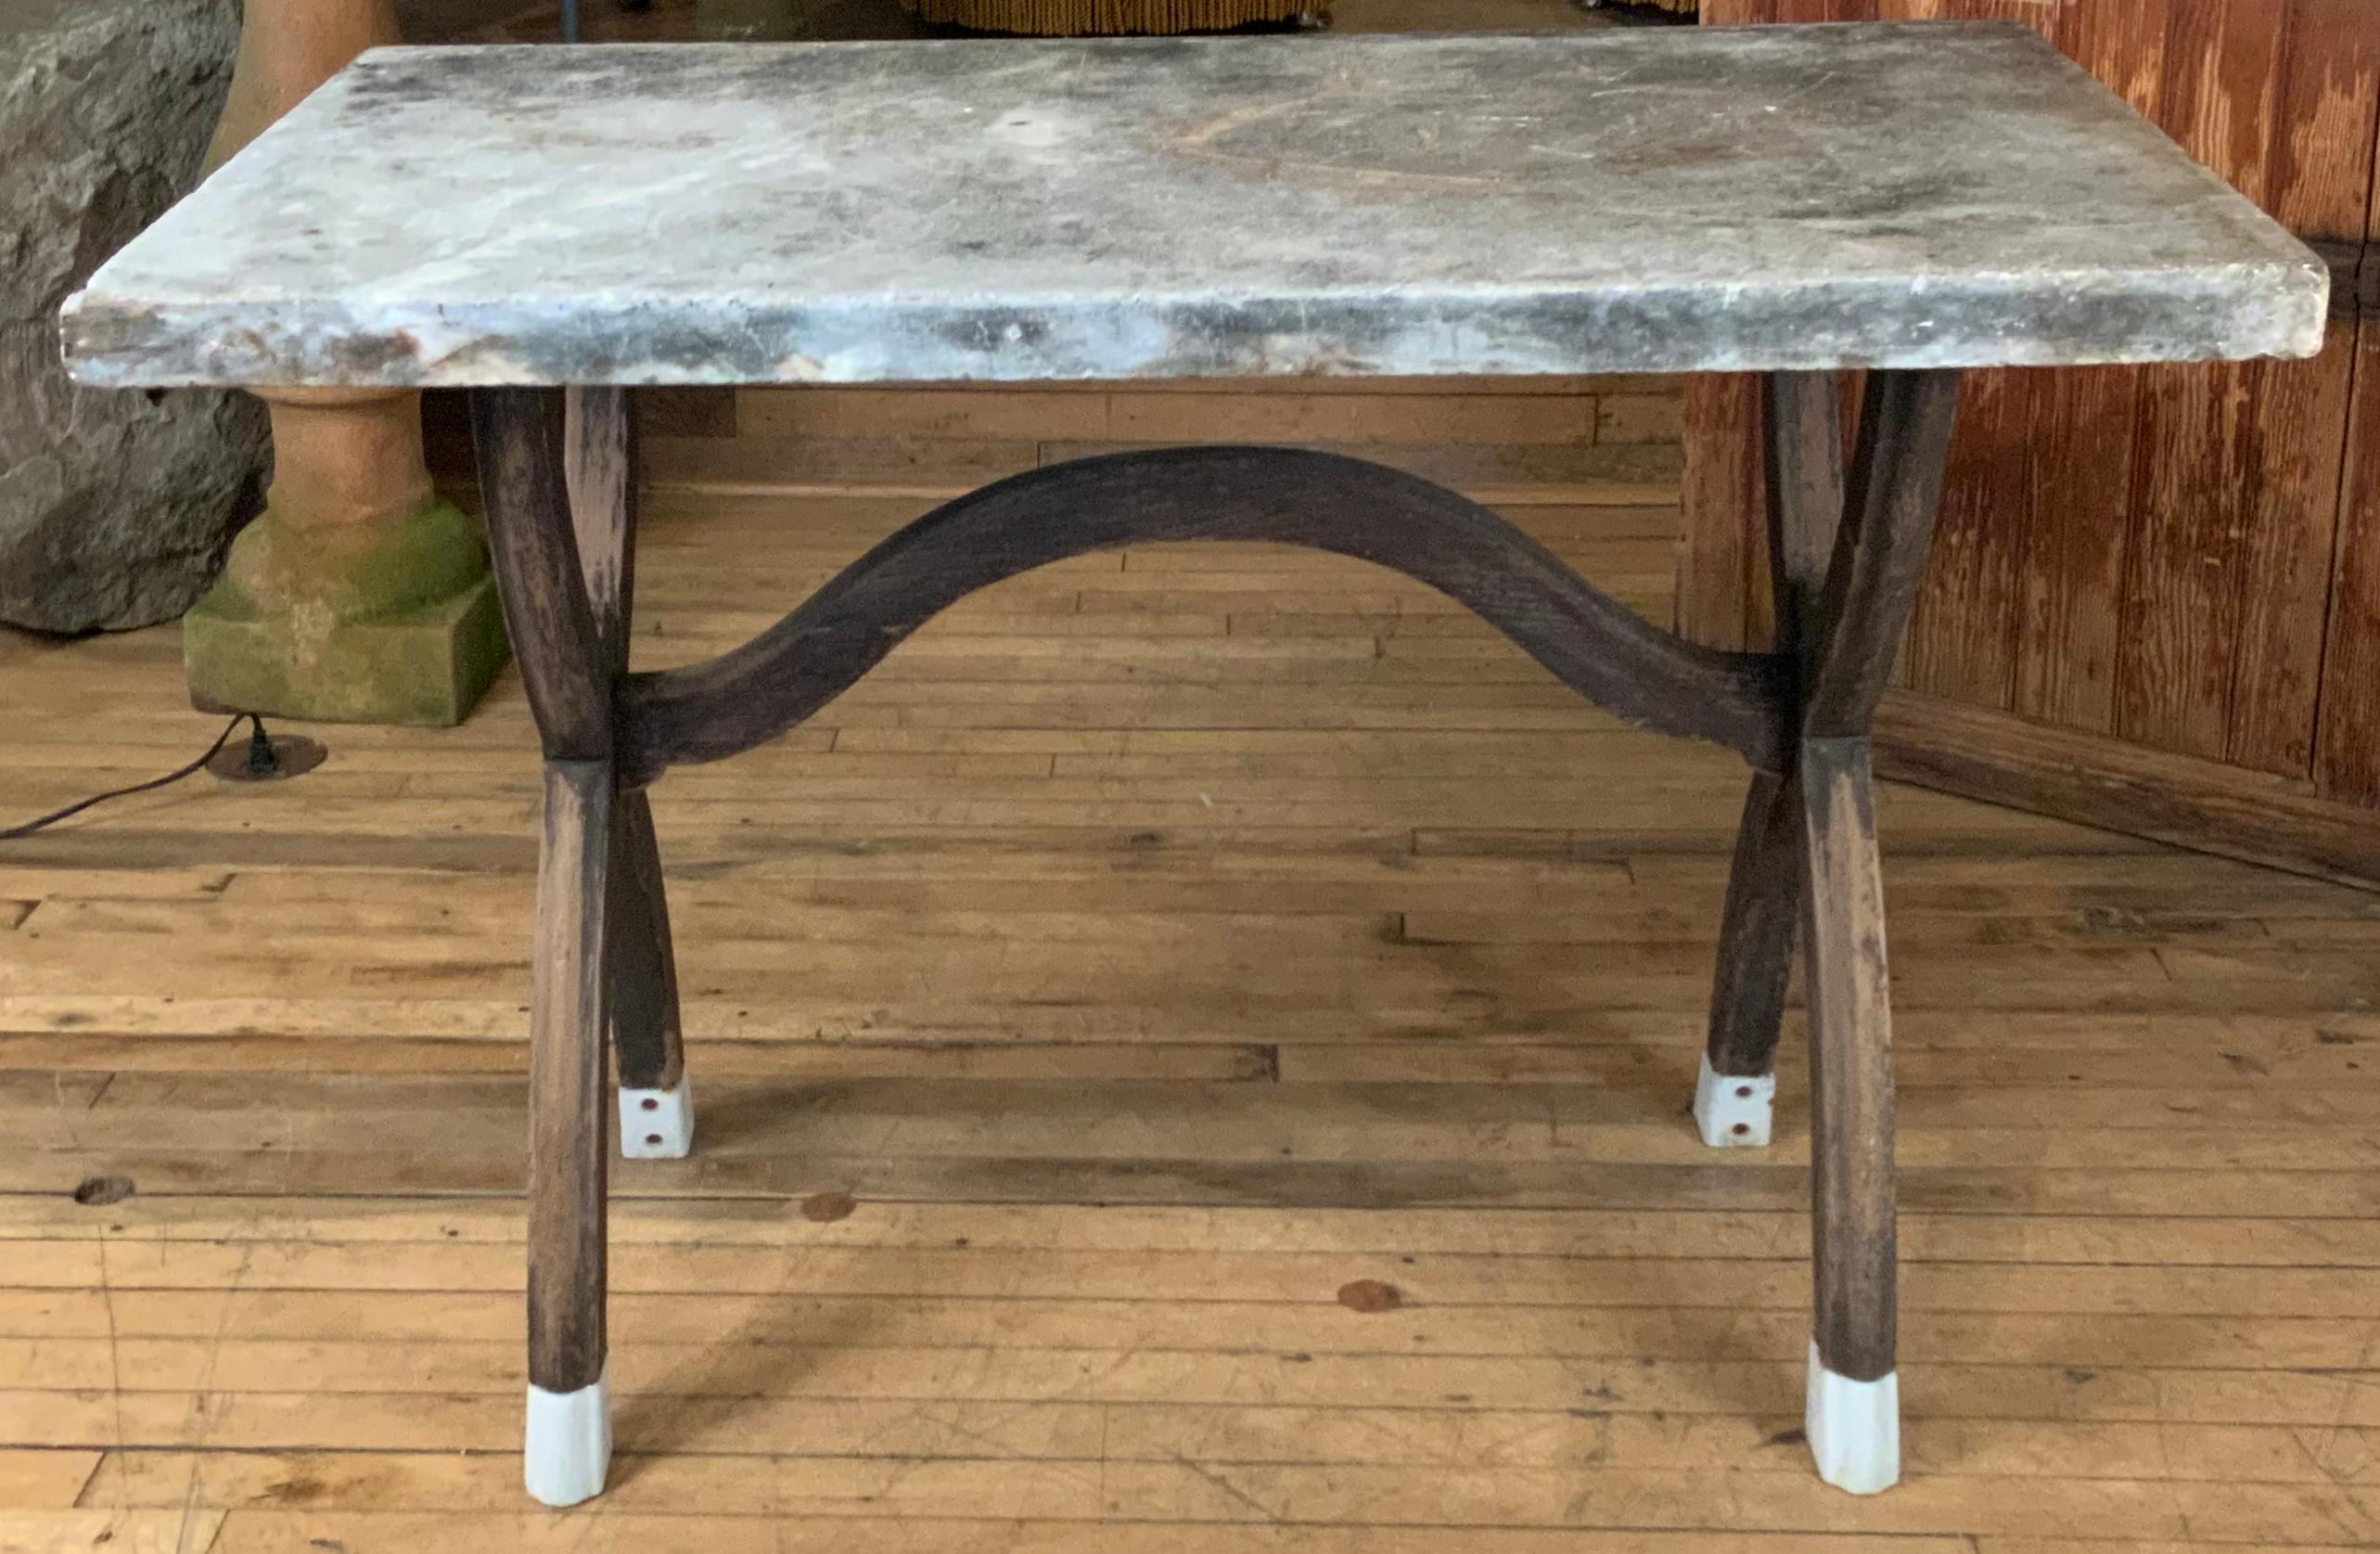 A very nice early 20th century wood base table with a thick antique marble top and curved X base with charming enameled feet. Beautiful sculptural form, and a beautiful marble top. Perfect for console or center table, or casual cafe or dining.